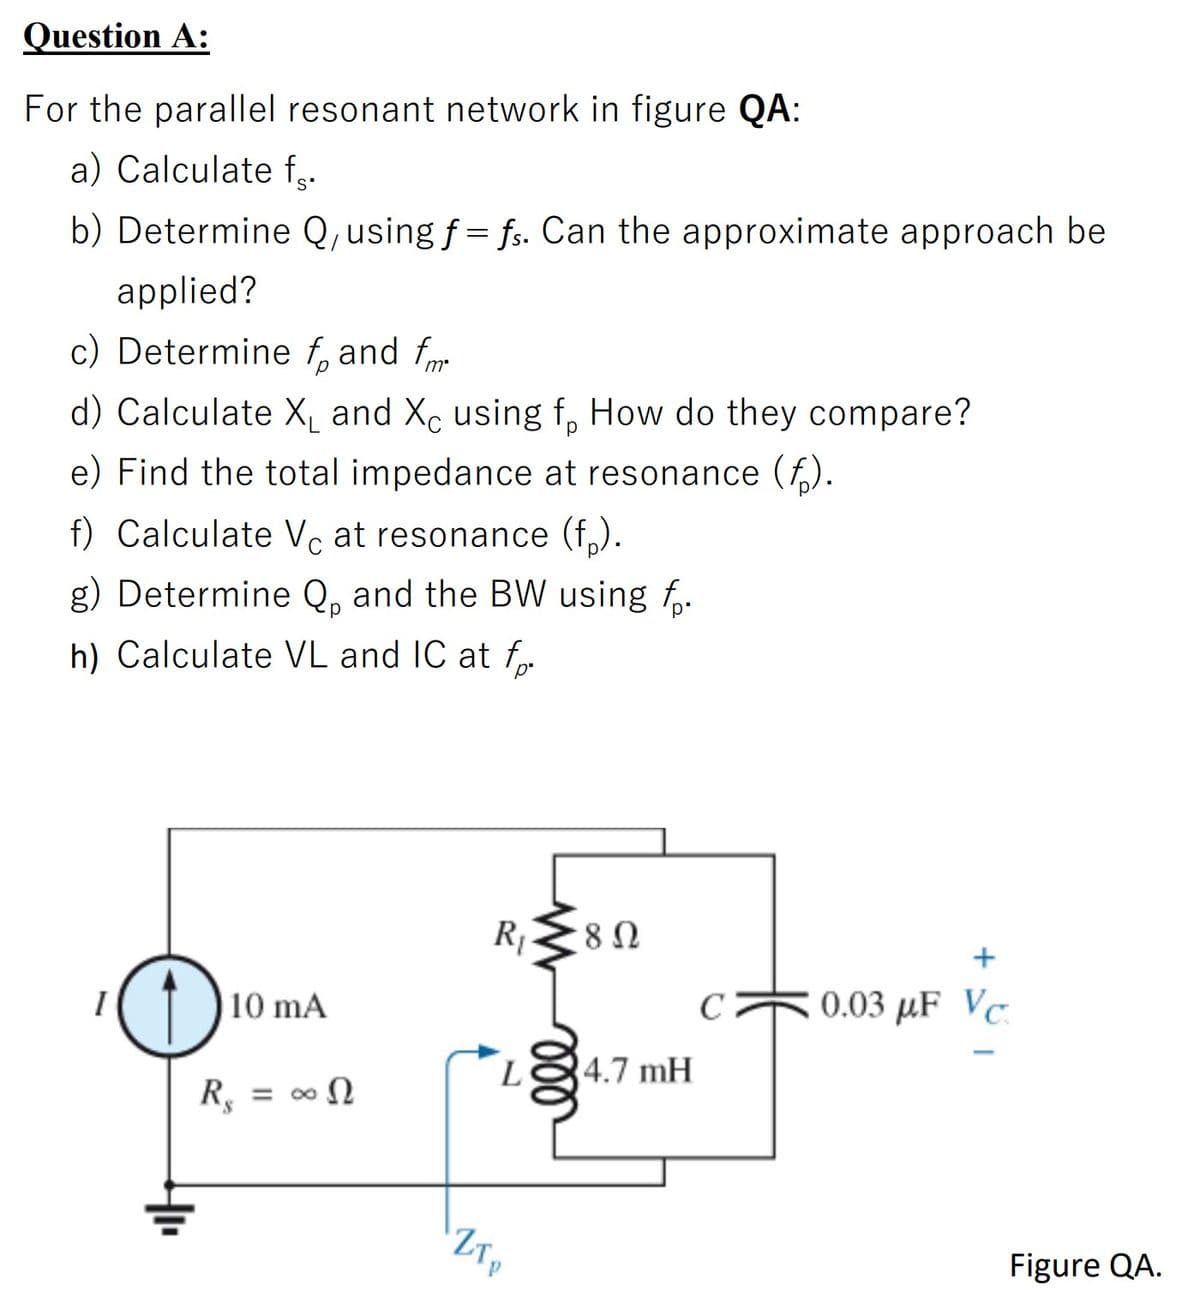 Question A:
For the parallel resonant network in figure QA:
a) Calculate f..
b) Determine Q,using f = fs. Can the approximate approach be
applied?
c) Determine f, and f
d) Calculate X and Xc using f, How do they compare?
e) Find the total impedance at resonance (f).
f) Calculate Vc at resonance (f,).
g) Determine Q, and the BW using f,.
h) Calculate VL and IC at f.
R,28N
+
10 mA
C
0.03 µF Vc.
L
4.7 mH
%3D
Figure QA.
